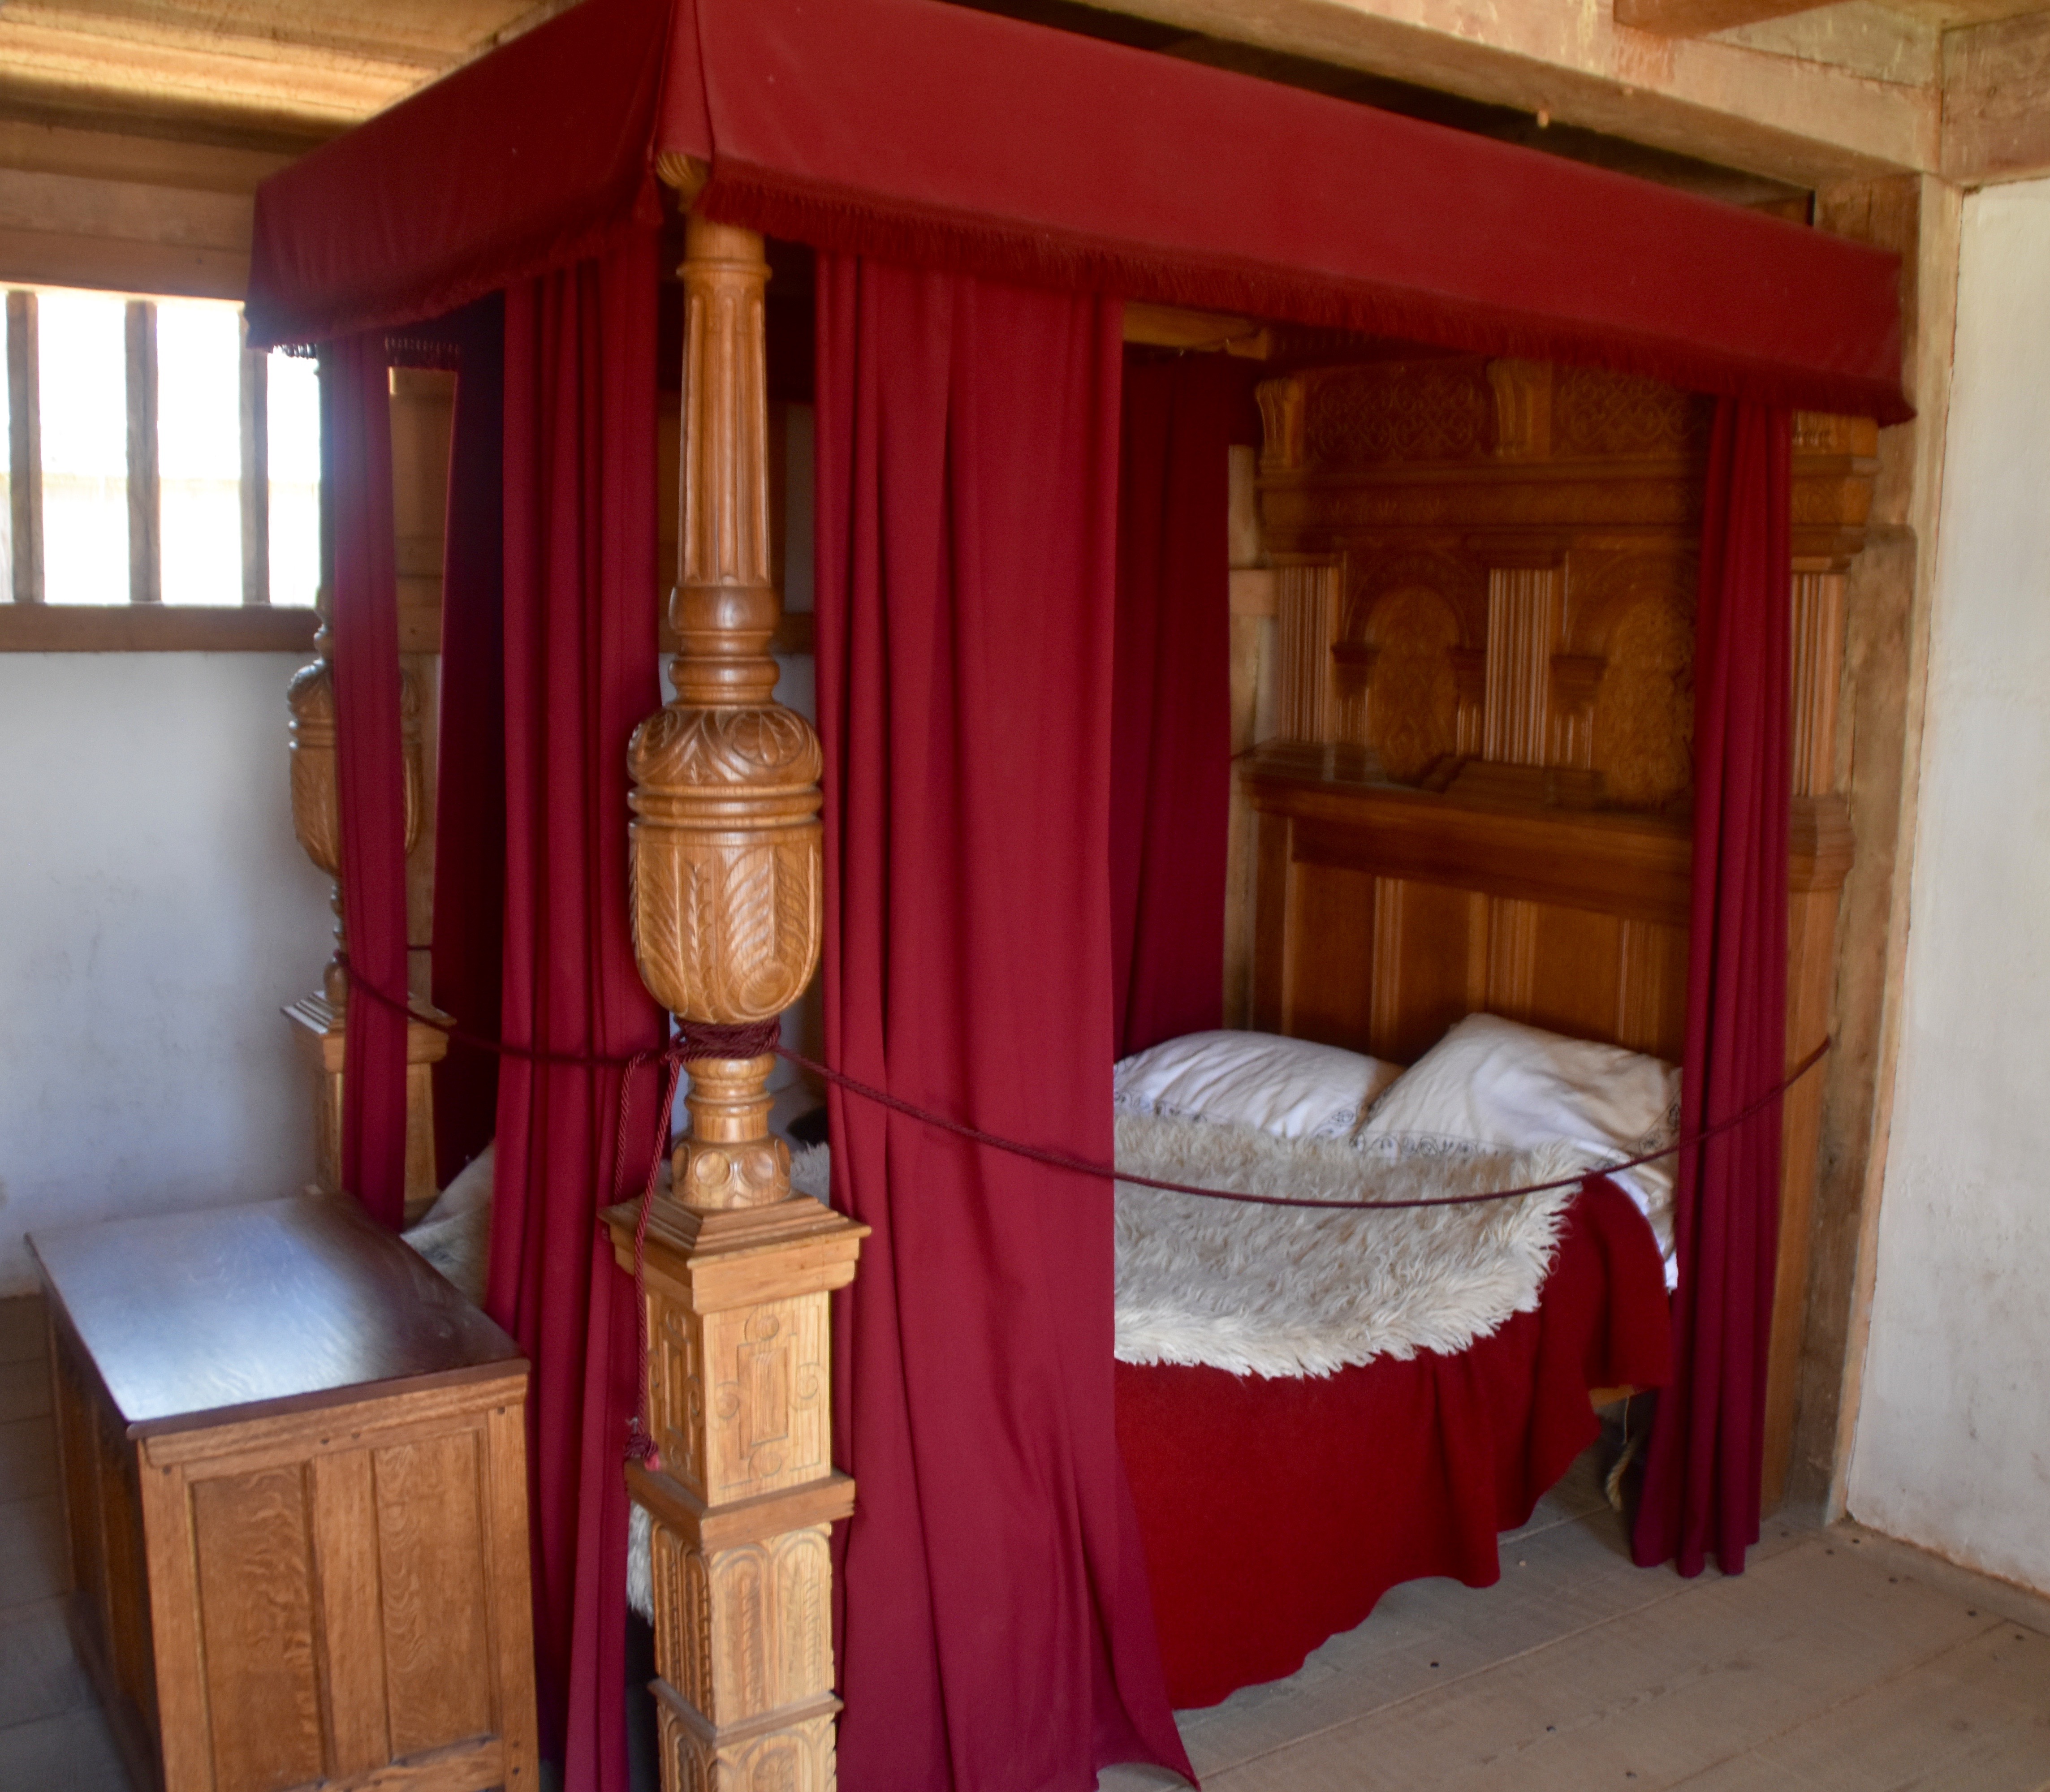 Governor's Bed, Jamestown Settlement